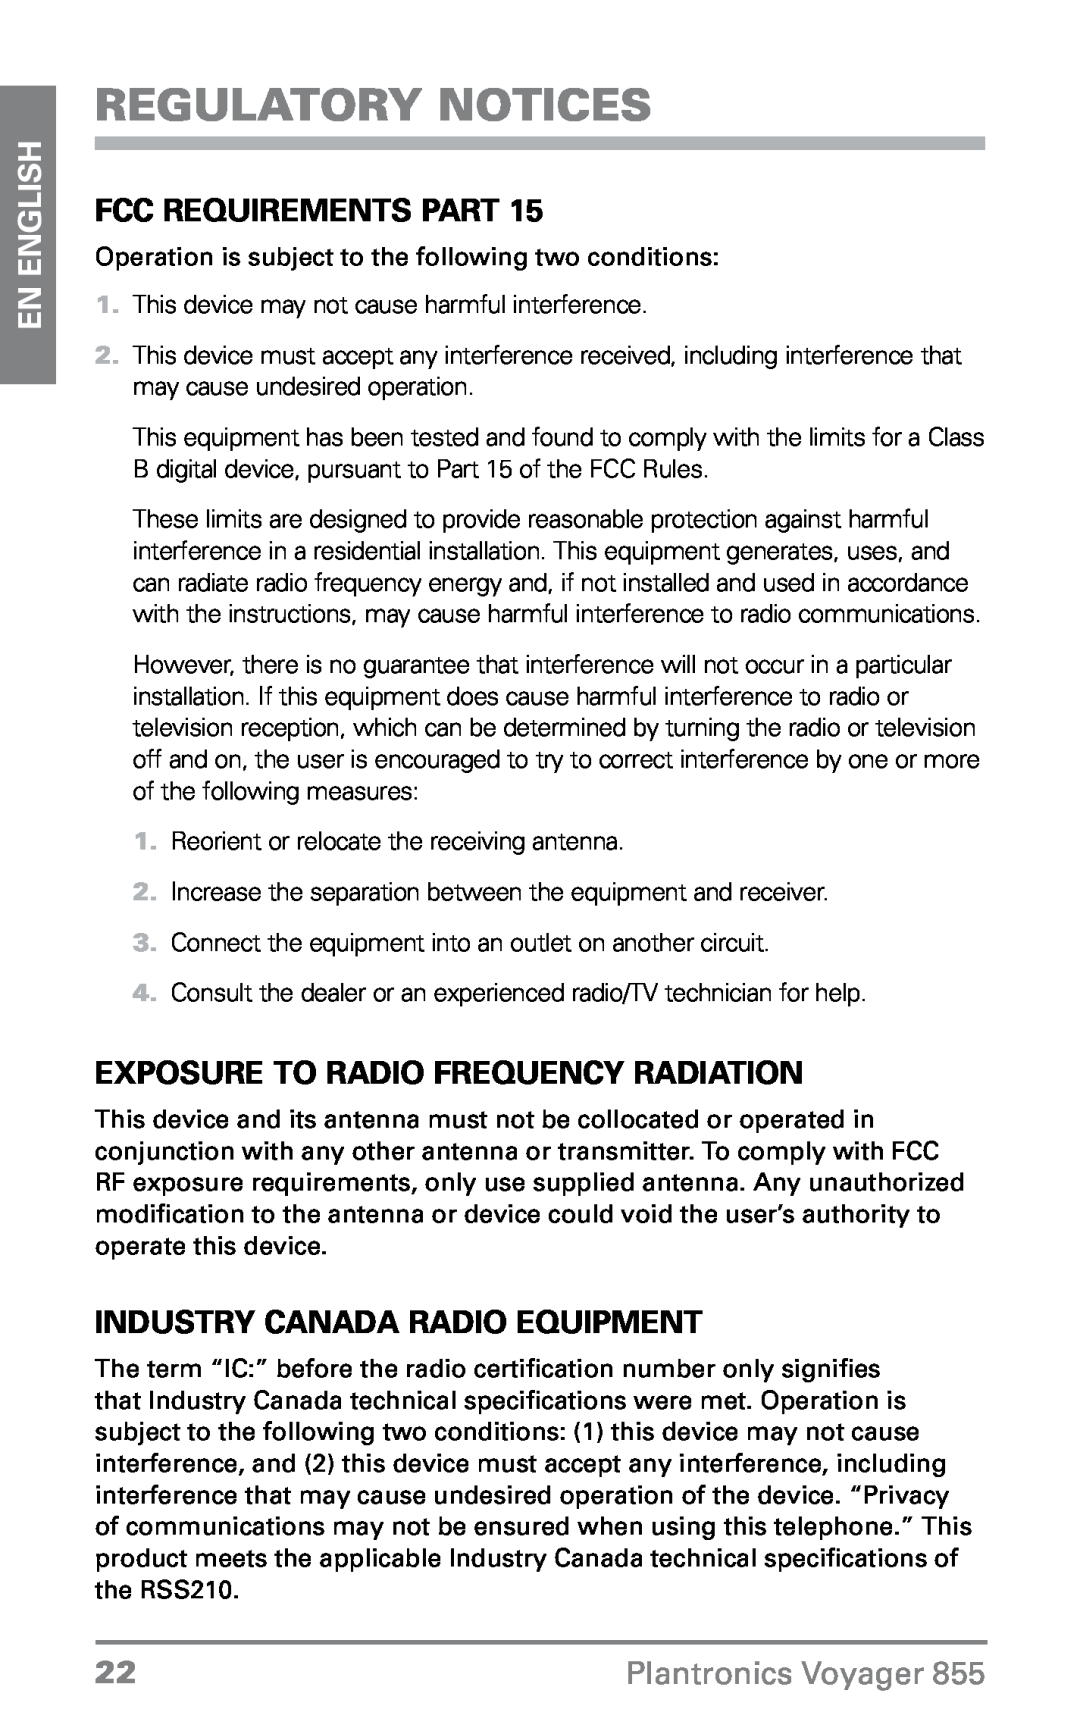 Plantronics VOYAGER855 manual Regulatory Notices, FCC Requirements Part, Exposure To Radio Frequency Radiation, En English 